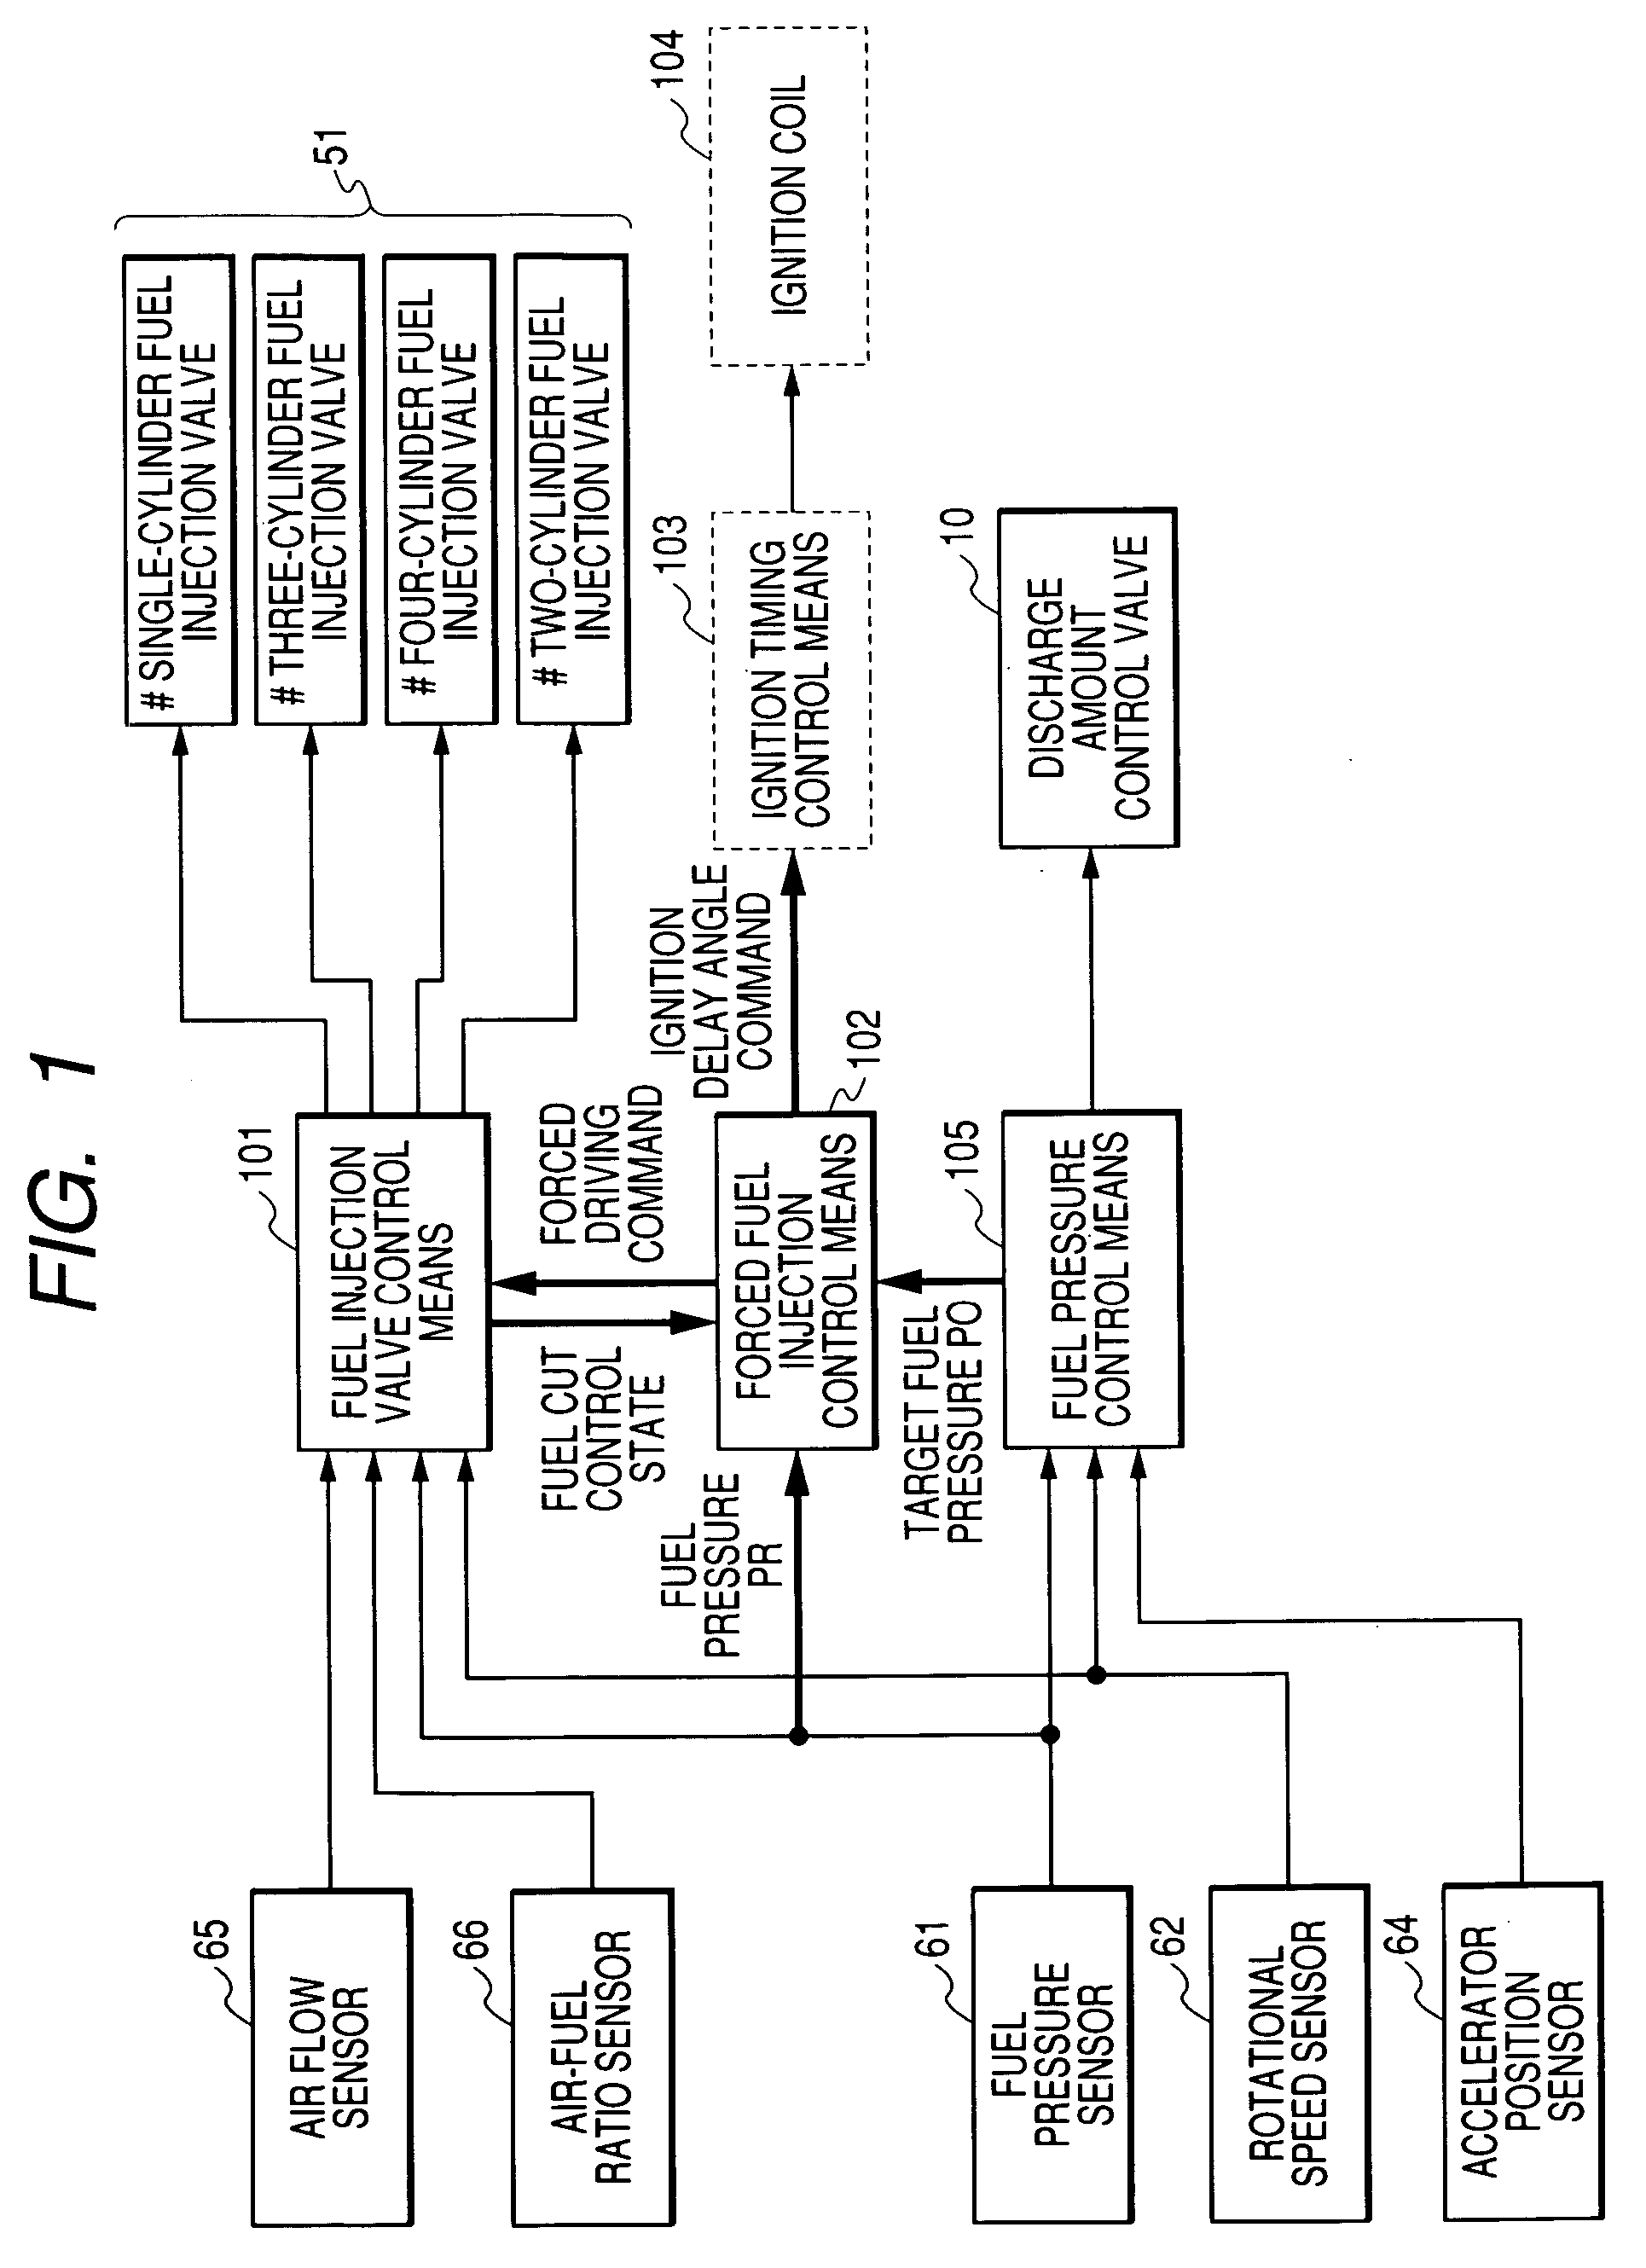 Fuel injection control device of internal combustion engine